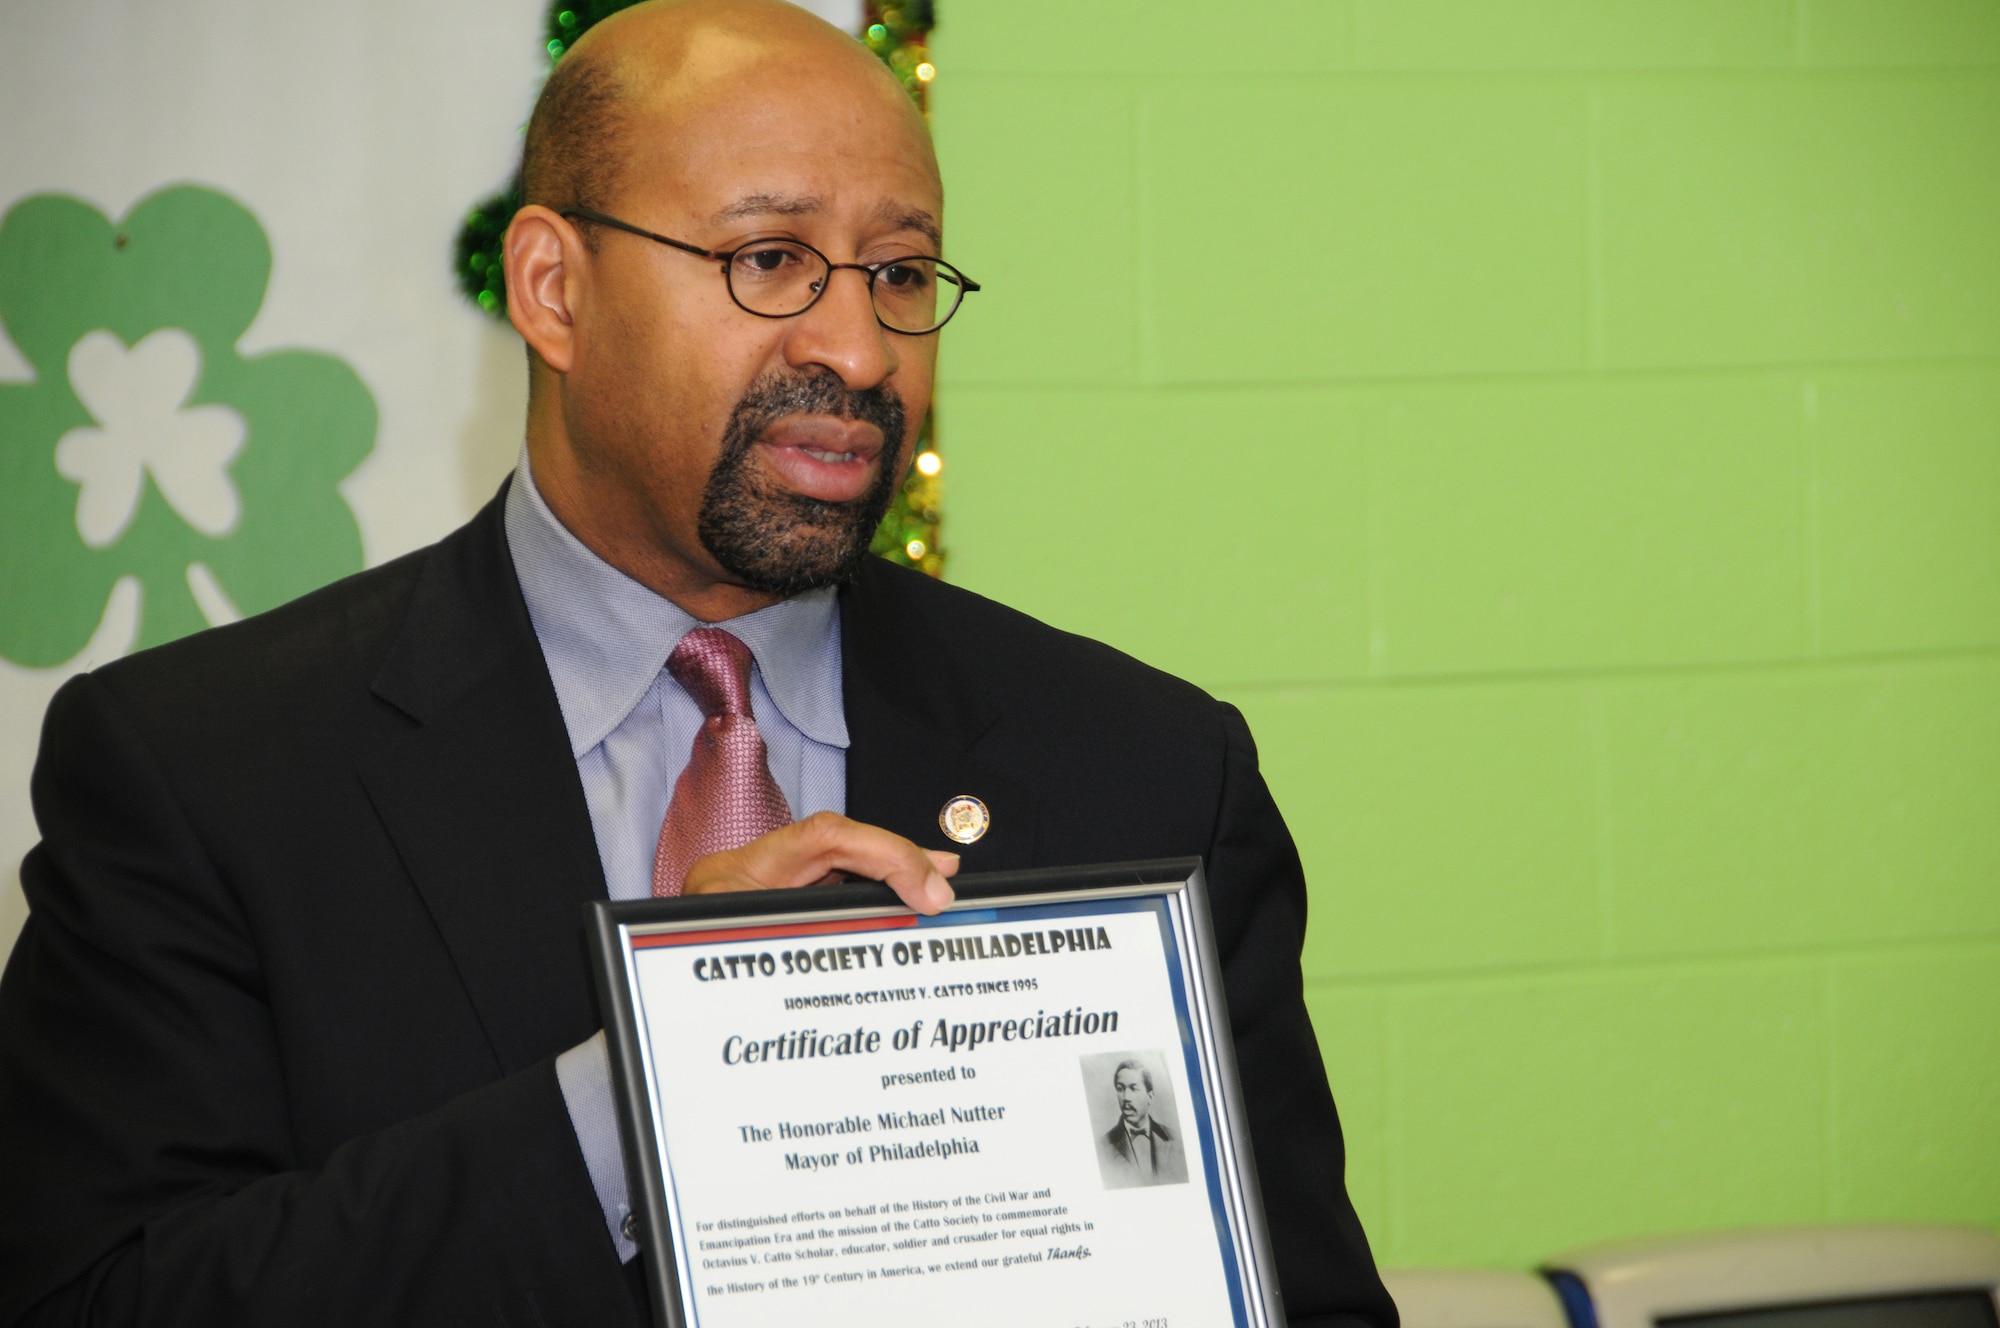 The Honorable Michael Nutter, mayor of Philadelphia, is presented a letter of appreciation from the Catto Society of Philadelphia on Feb. 23 during the 18th annual O.V. Catto Memorial Ceremony held at the Star Gardens Recreation Center at 6th and Lombard streets in Philadelphia. Mayor Nutter is the first mayor to have attended the ceremony.